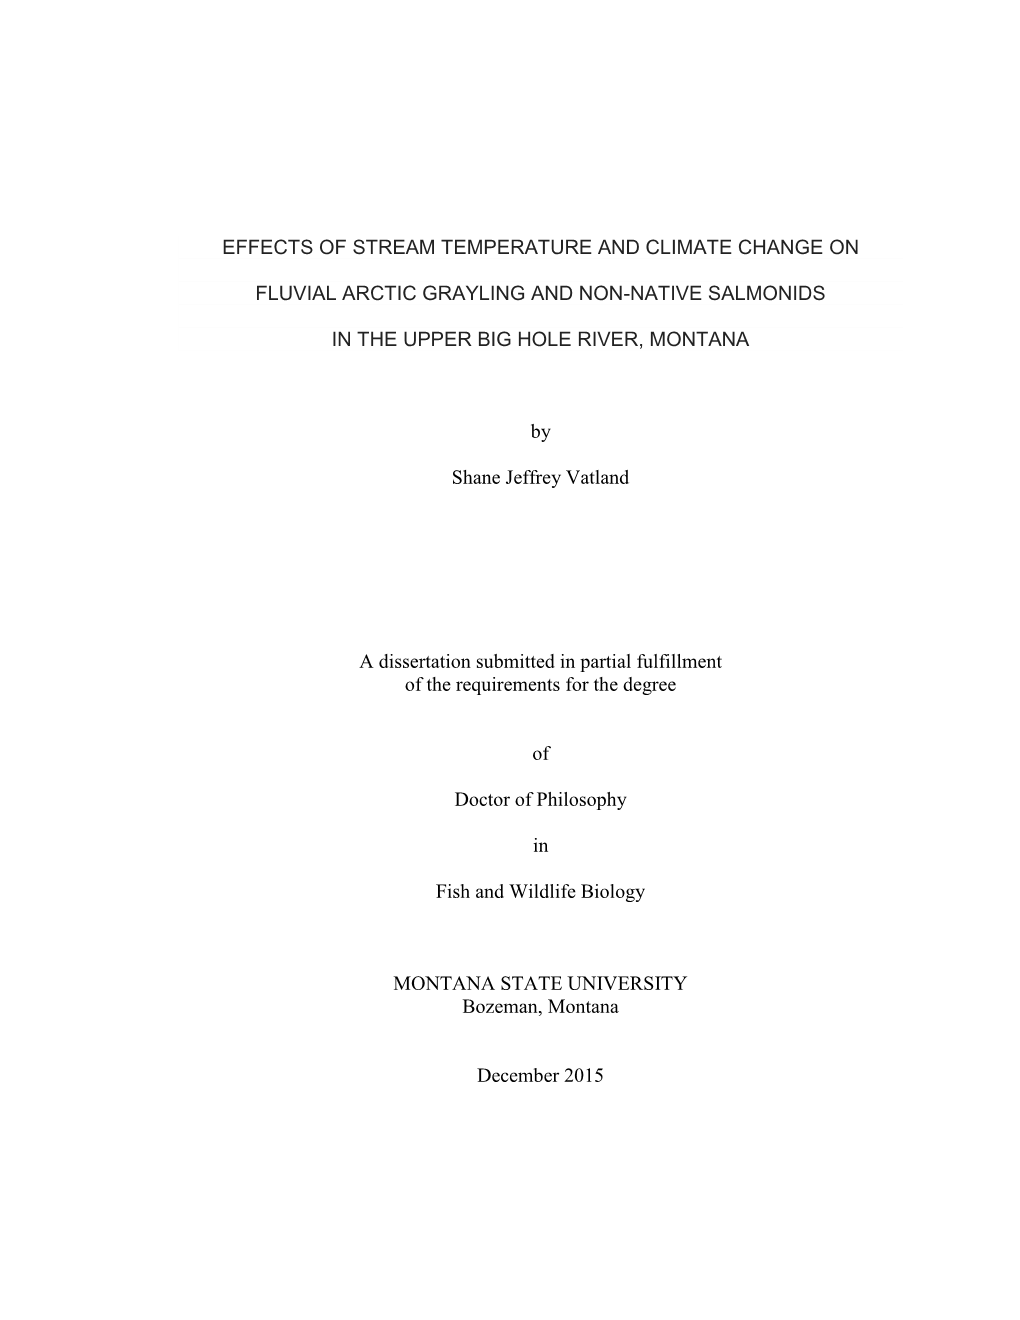 Effects of Stream Temperature and Climate Change On